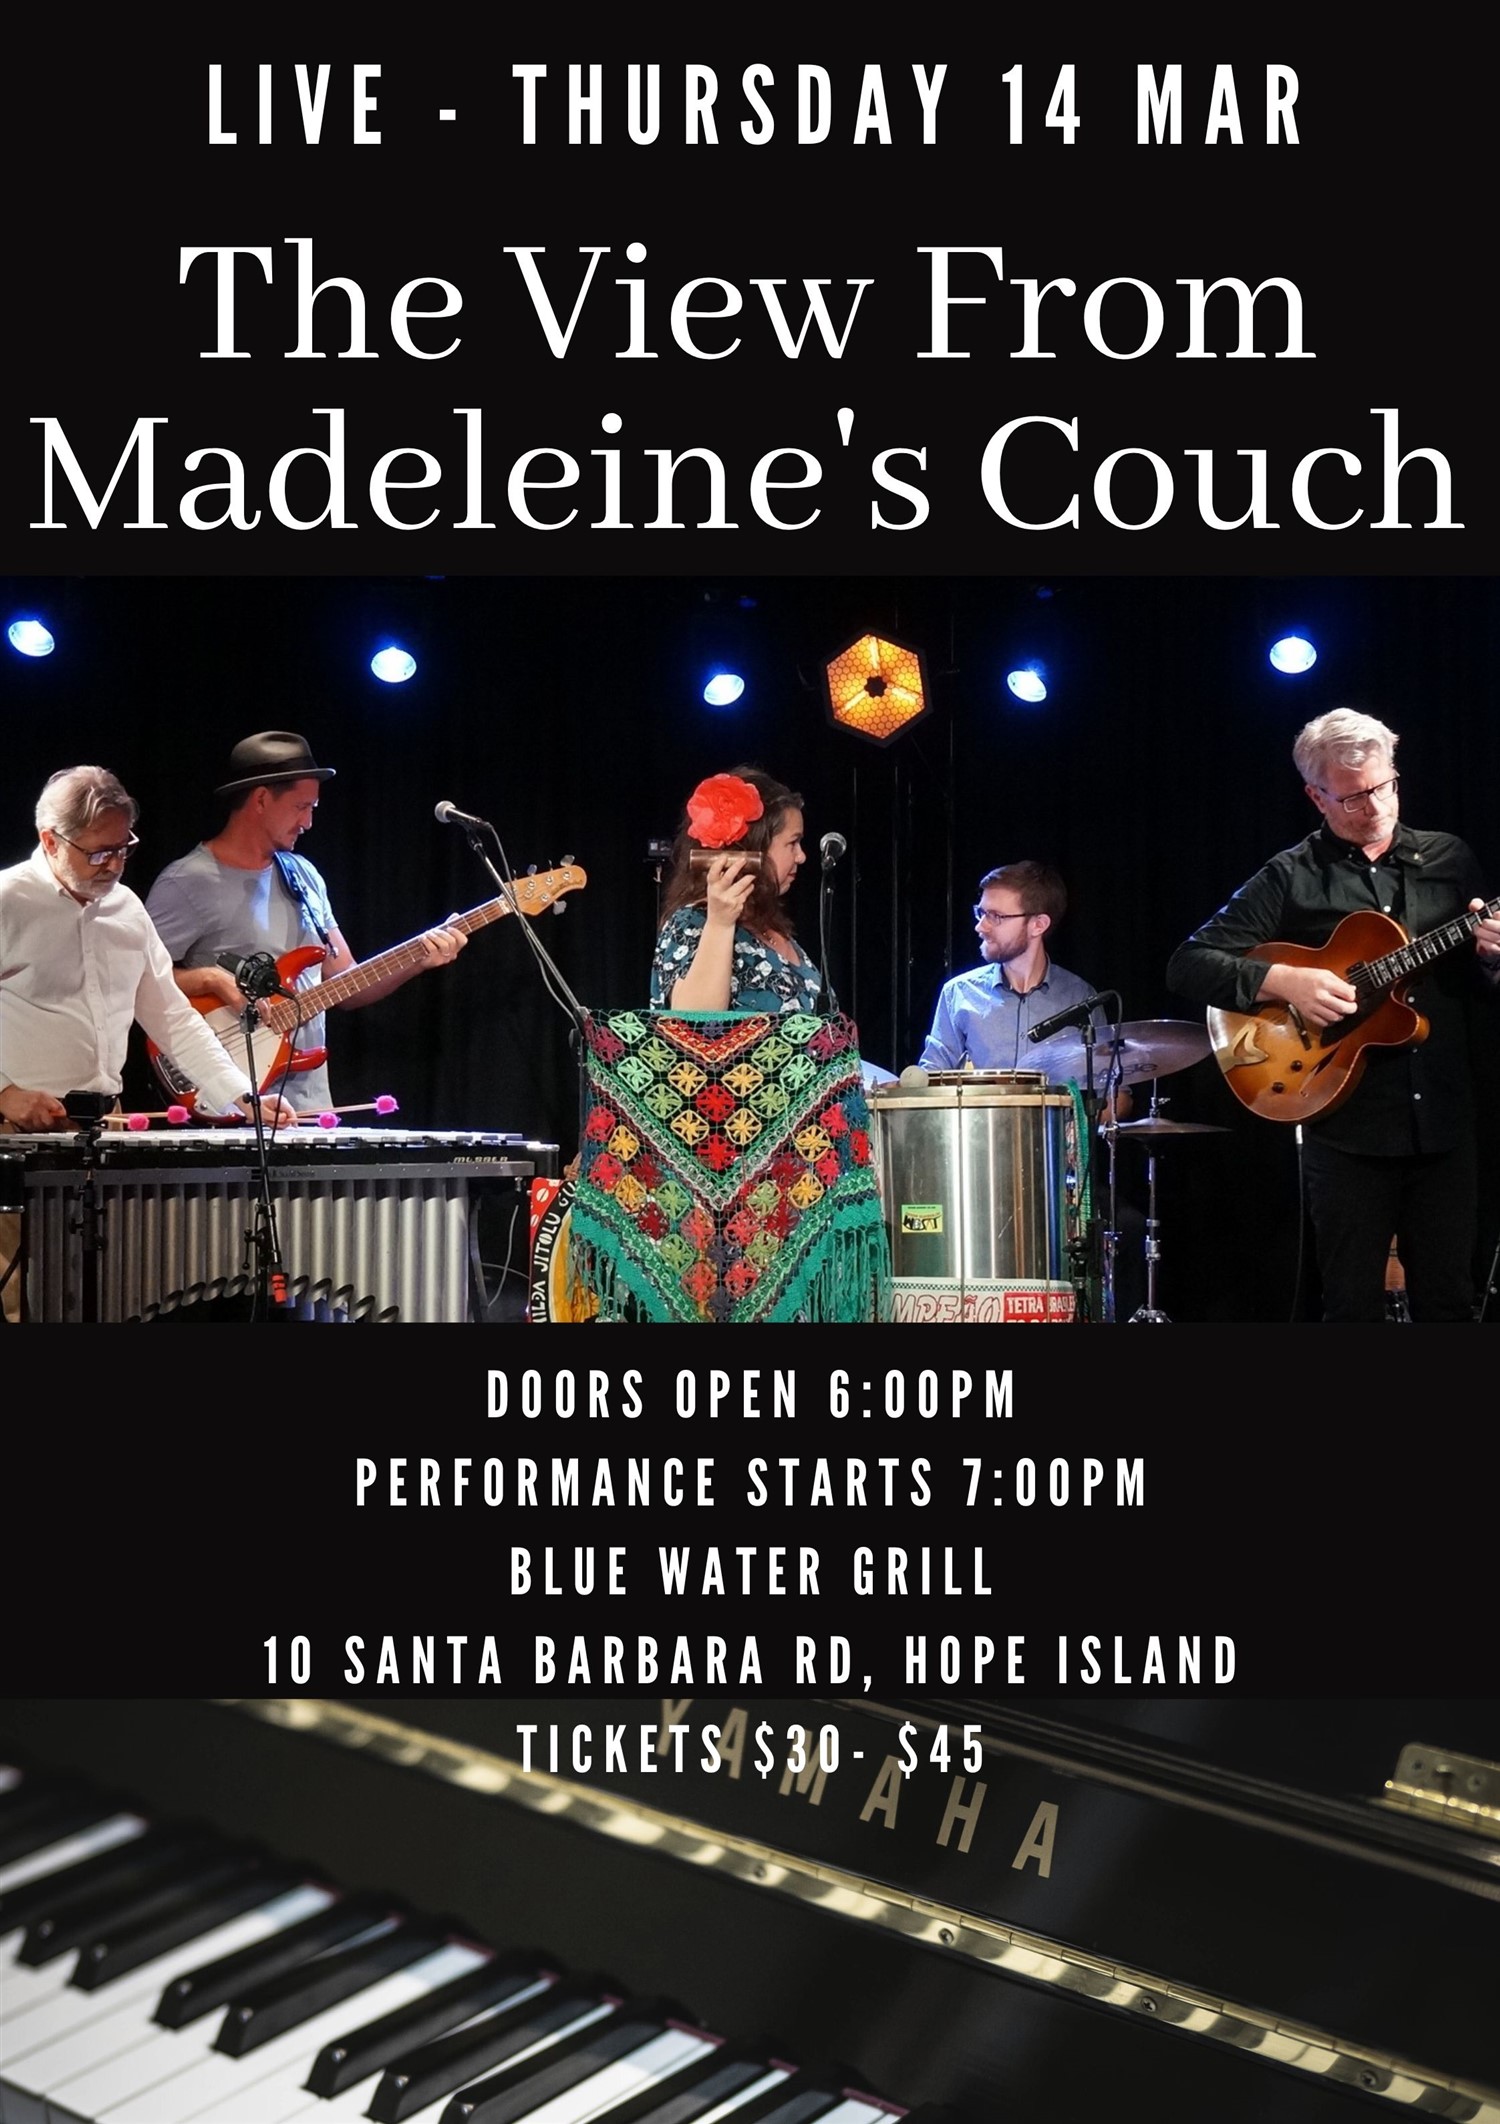 The View from Madeleine's Couch  on Mar 14, 18:00@Hope Island Jazz - Blue Water Grill - Buy tickets and Get information on Hope Island Jazz hopeislandjazz.com.au